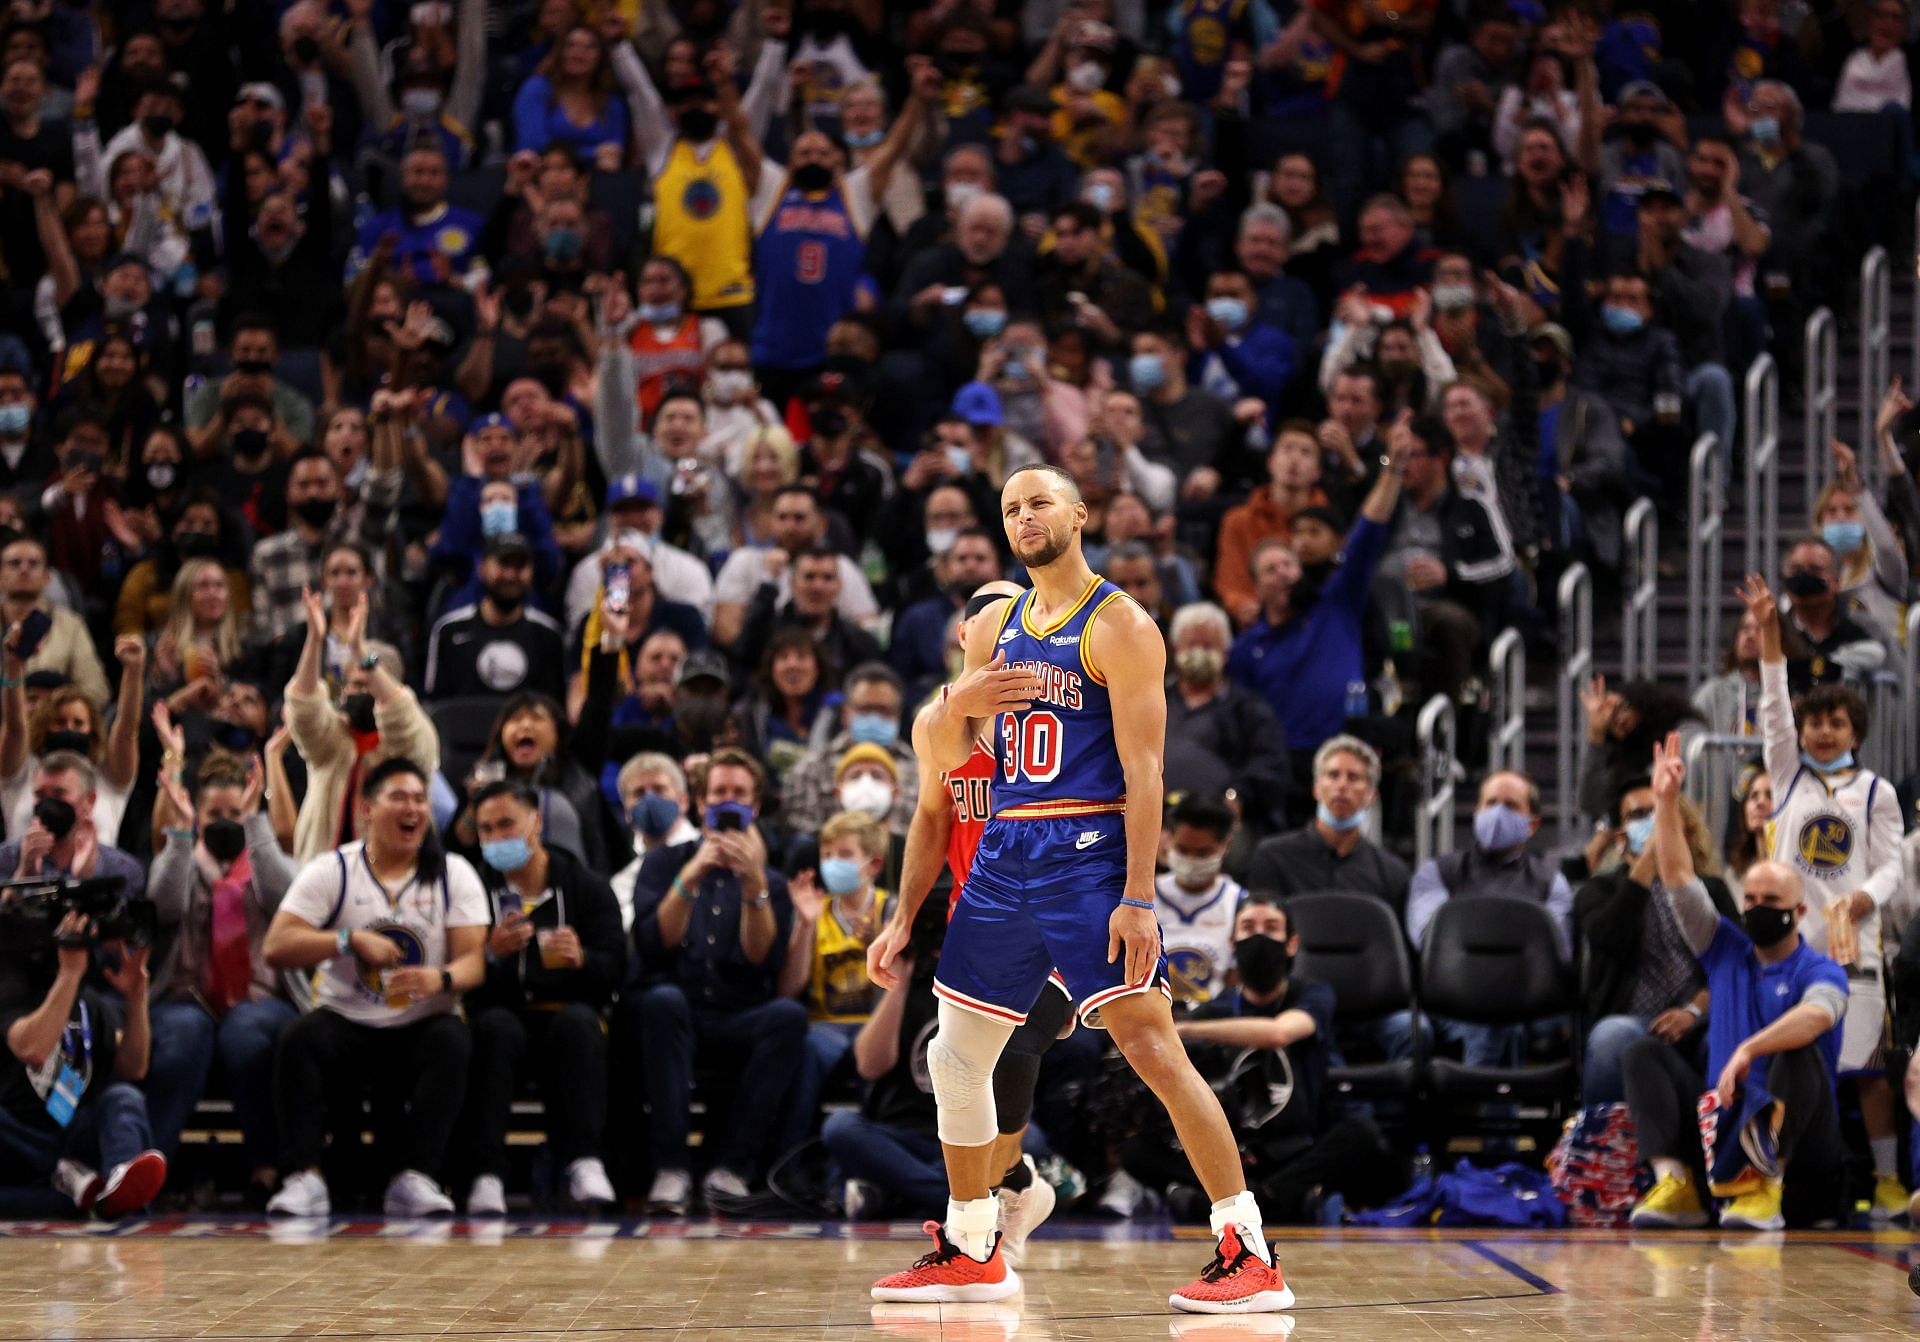 Stephen Curry already holds the record for most three-pointers in NBA history, including playoffs